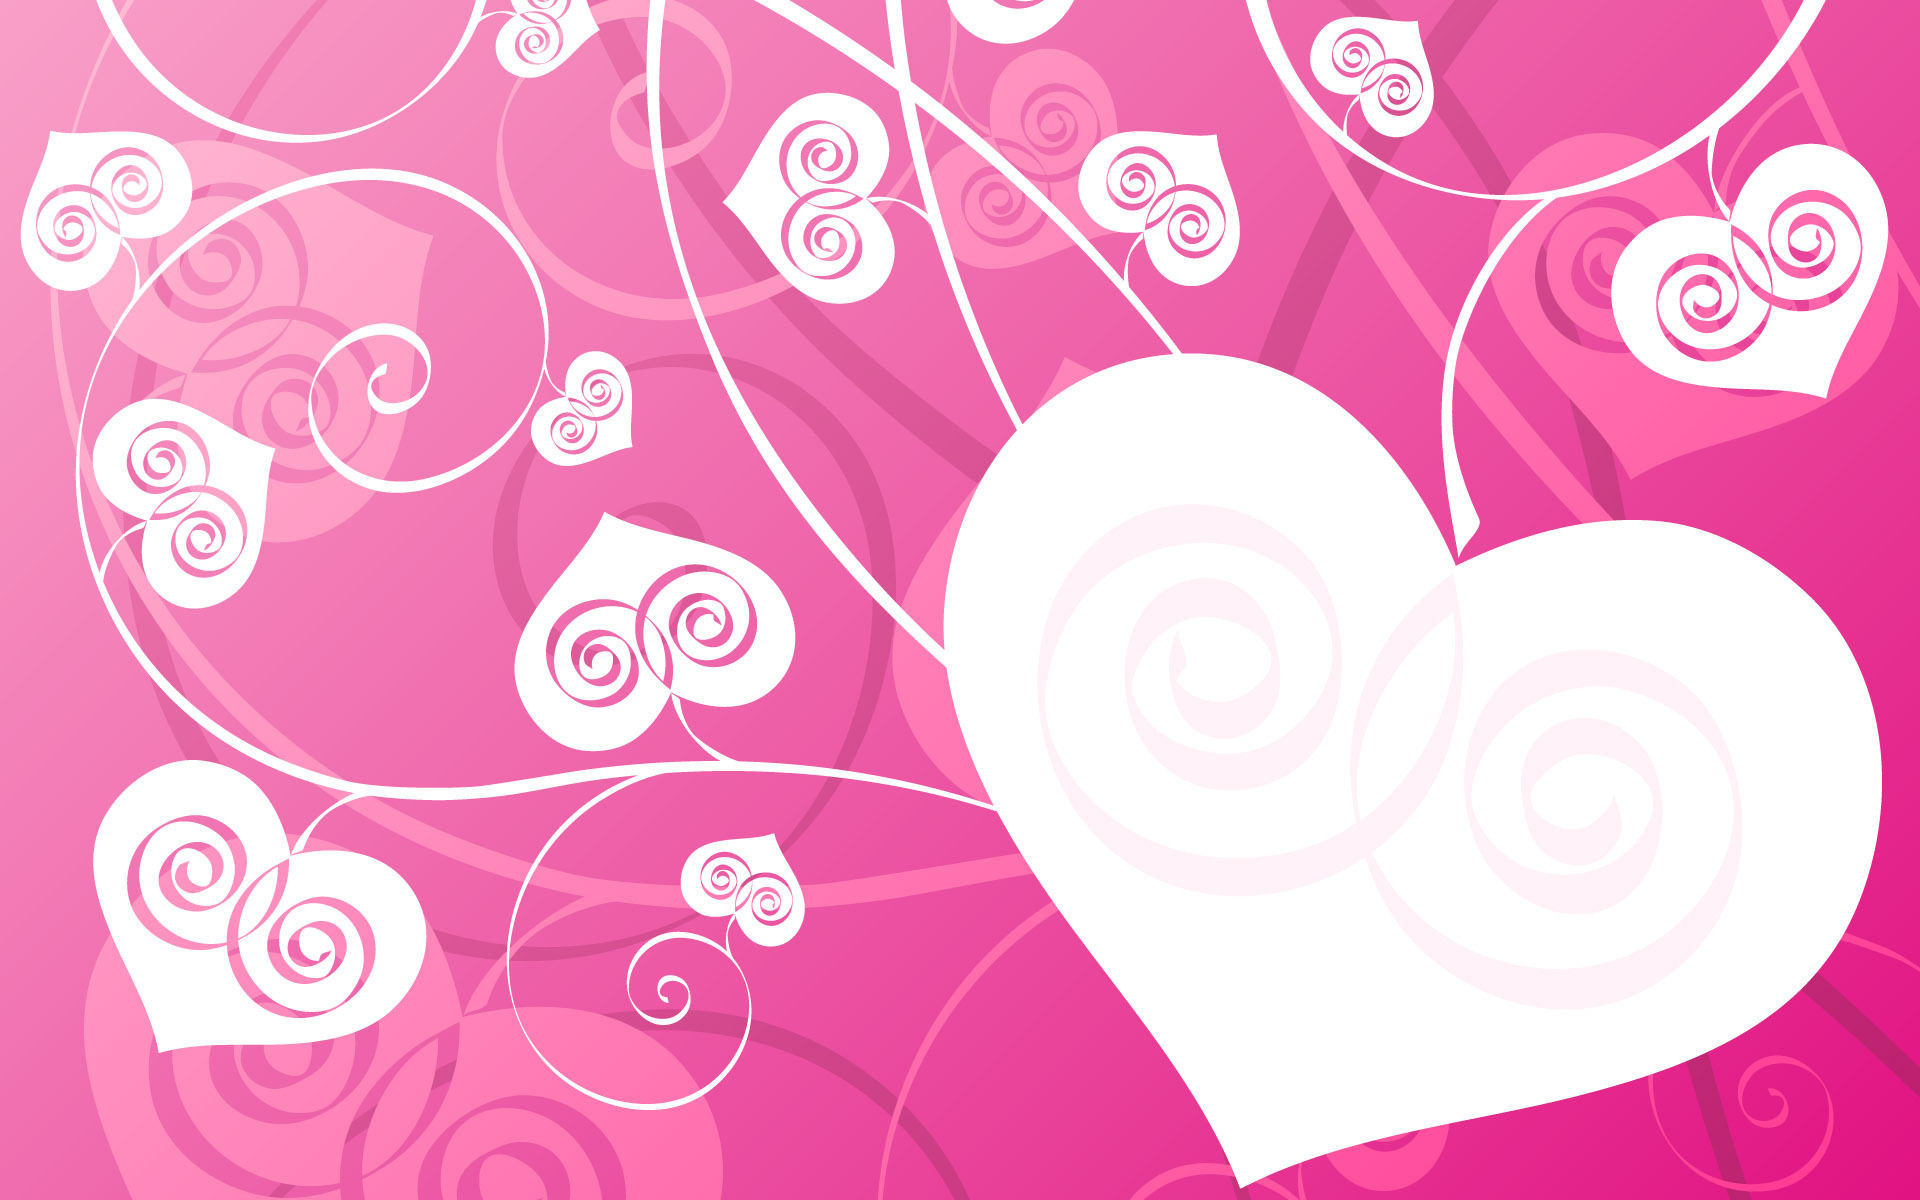 Love Pink Vs Wallpapers For Iphone - Kemecer.com